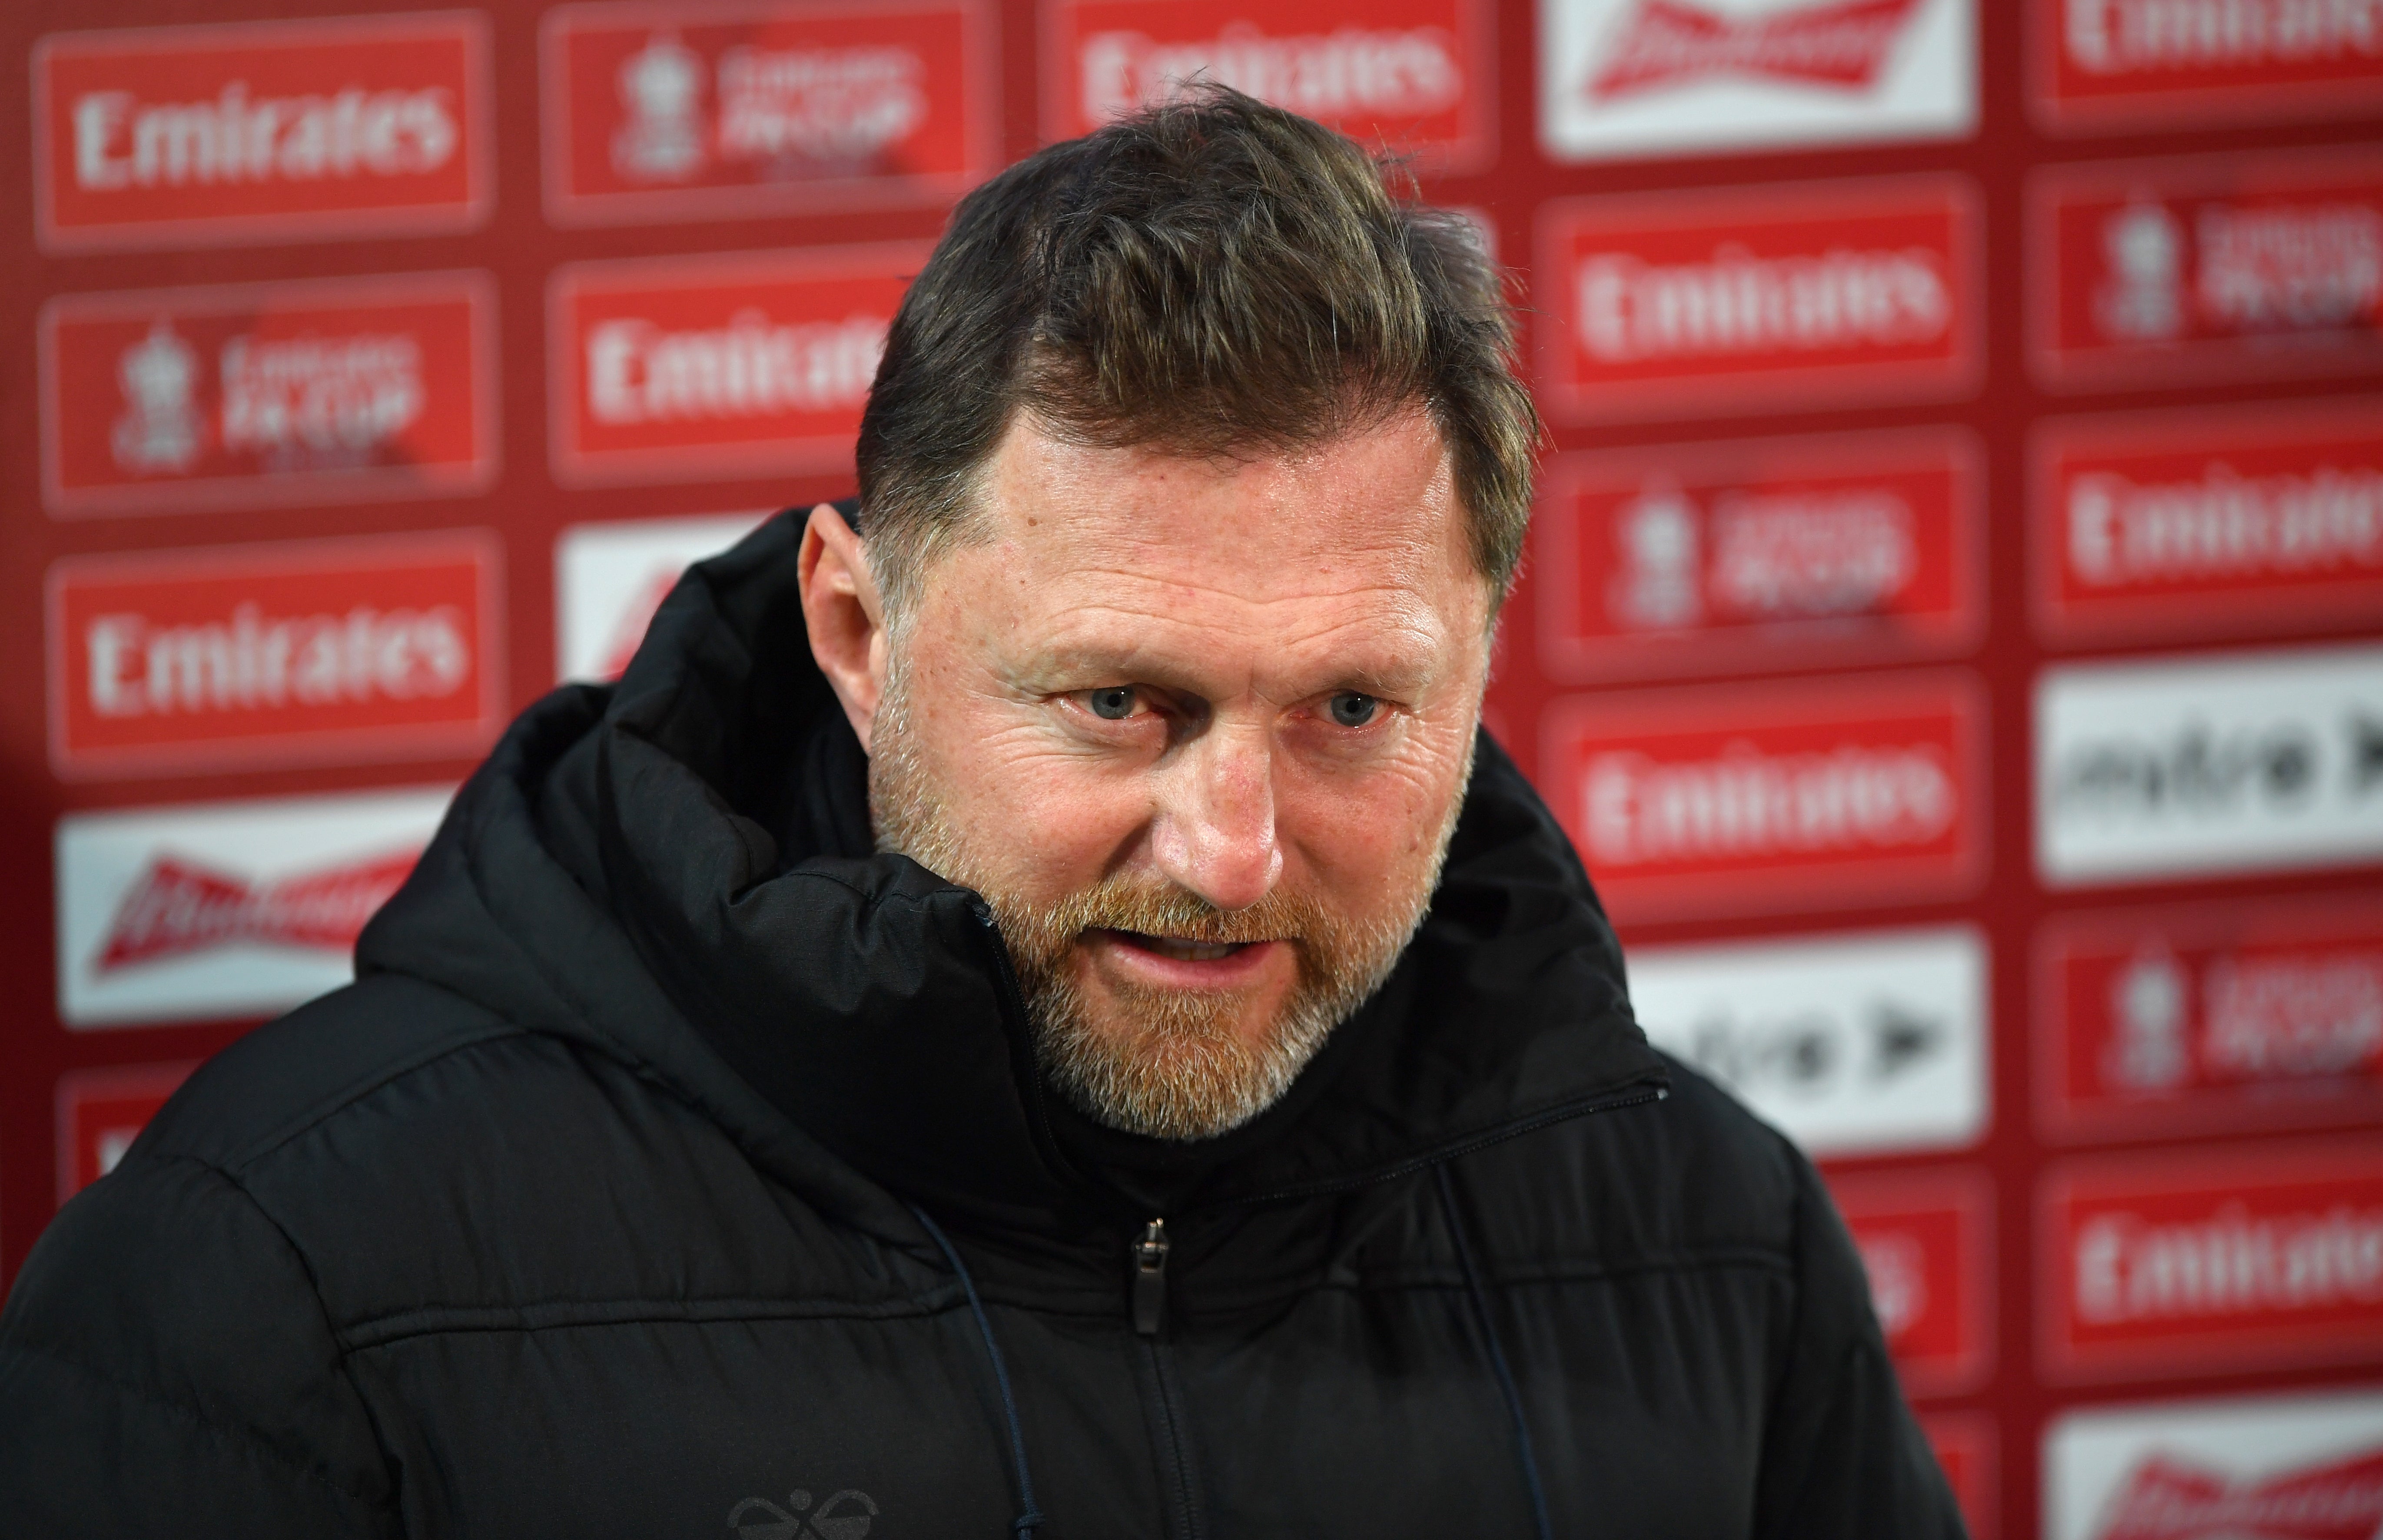 Southampton manager Ralph Hasenhuttl will be targeting an upset against City (Simon Galloway/PA)